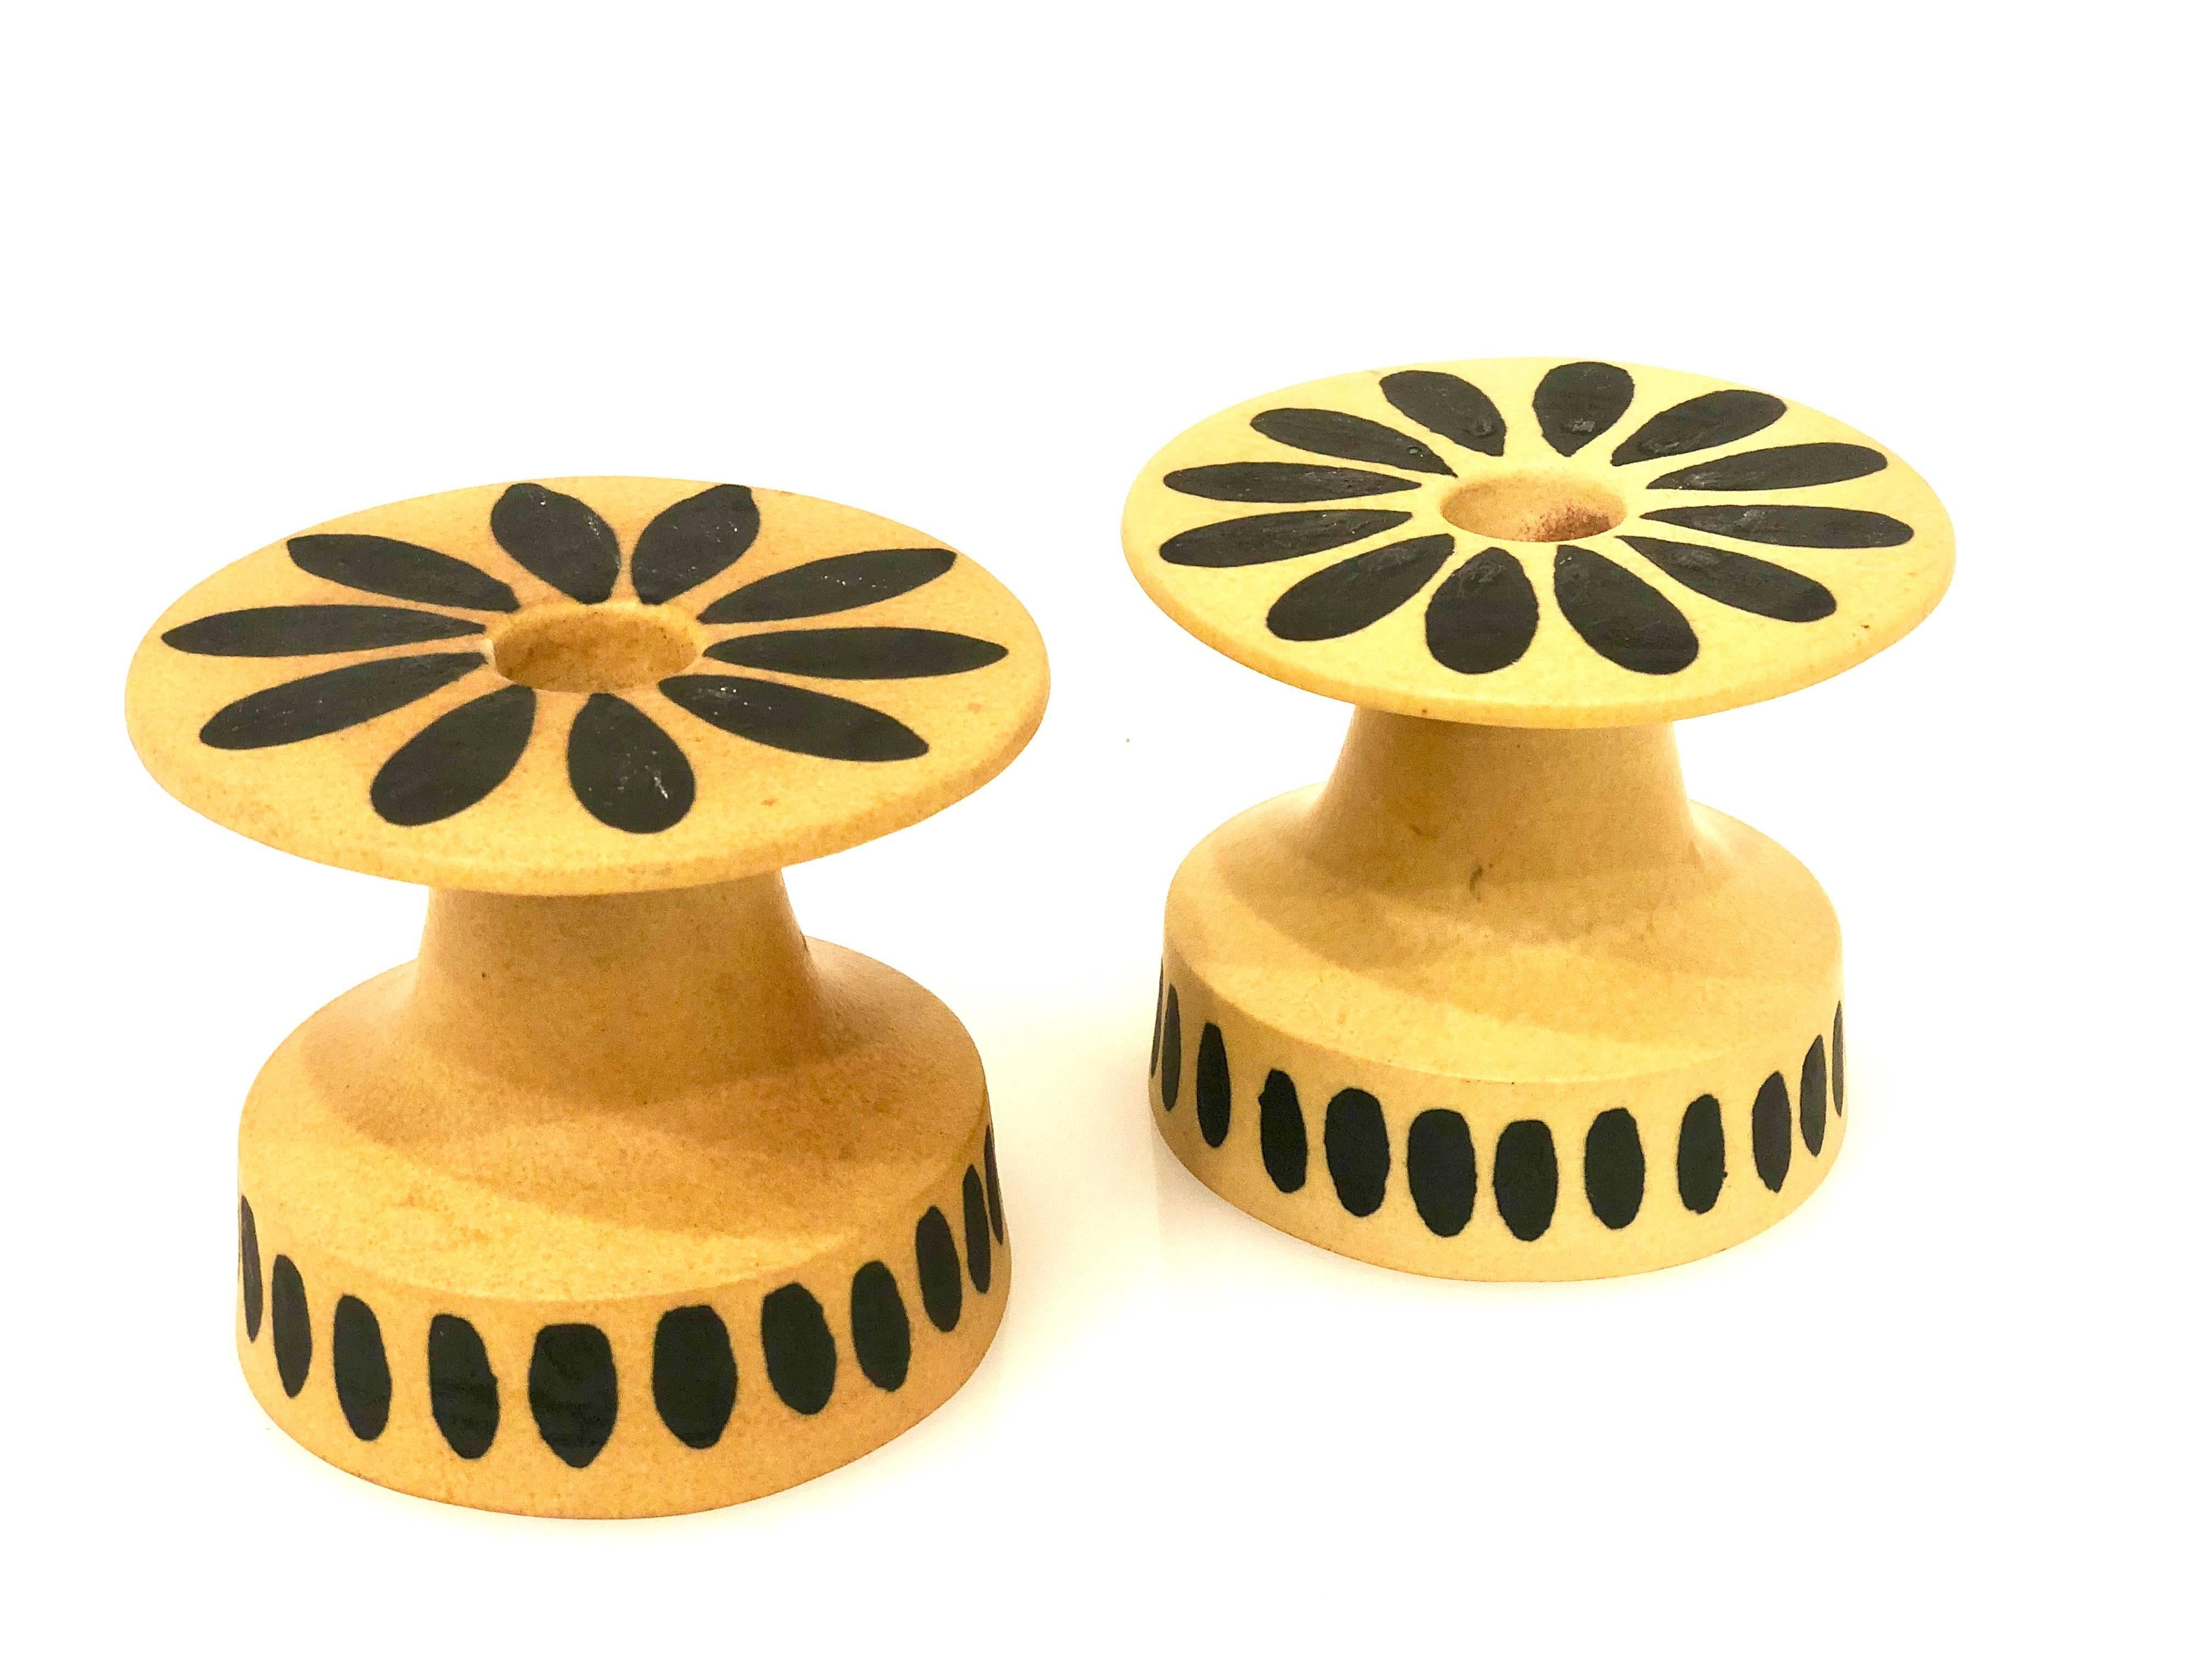 Pair of Midcentury Ceramic Candlestick Holders by Bennington Potters In Excellent Condition For Sale In San Diego, CA